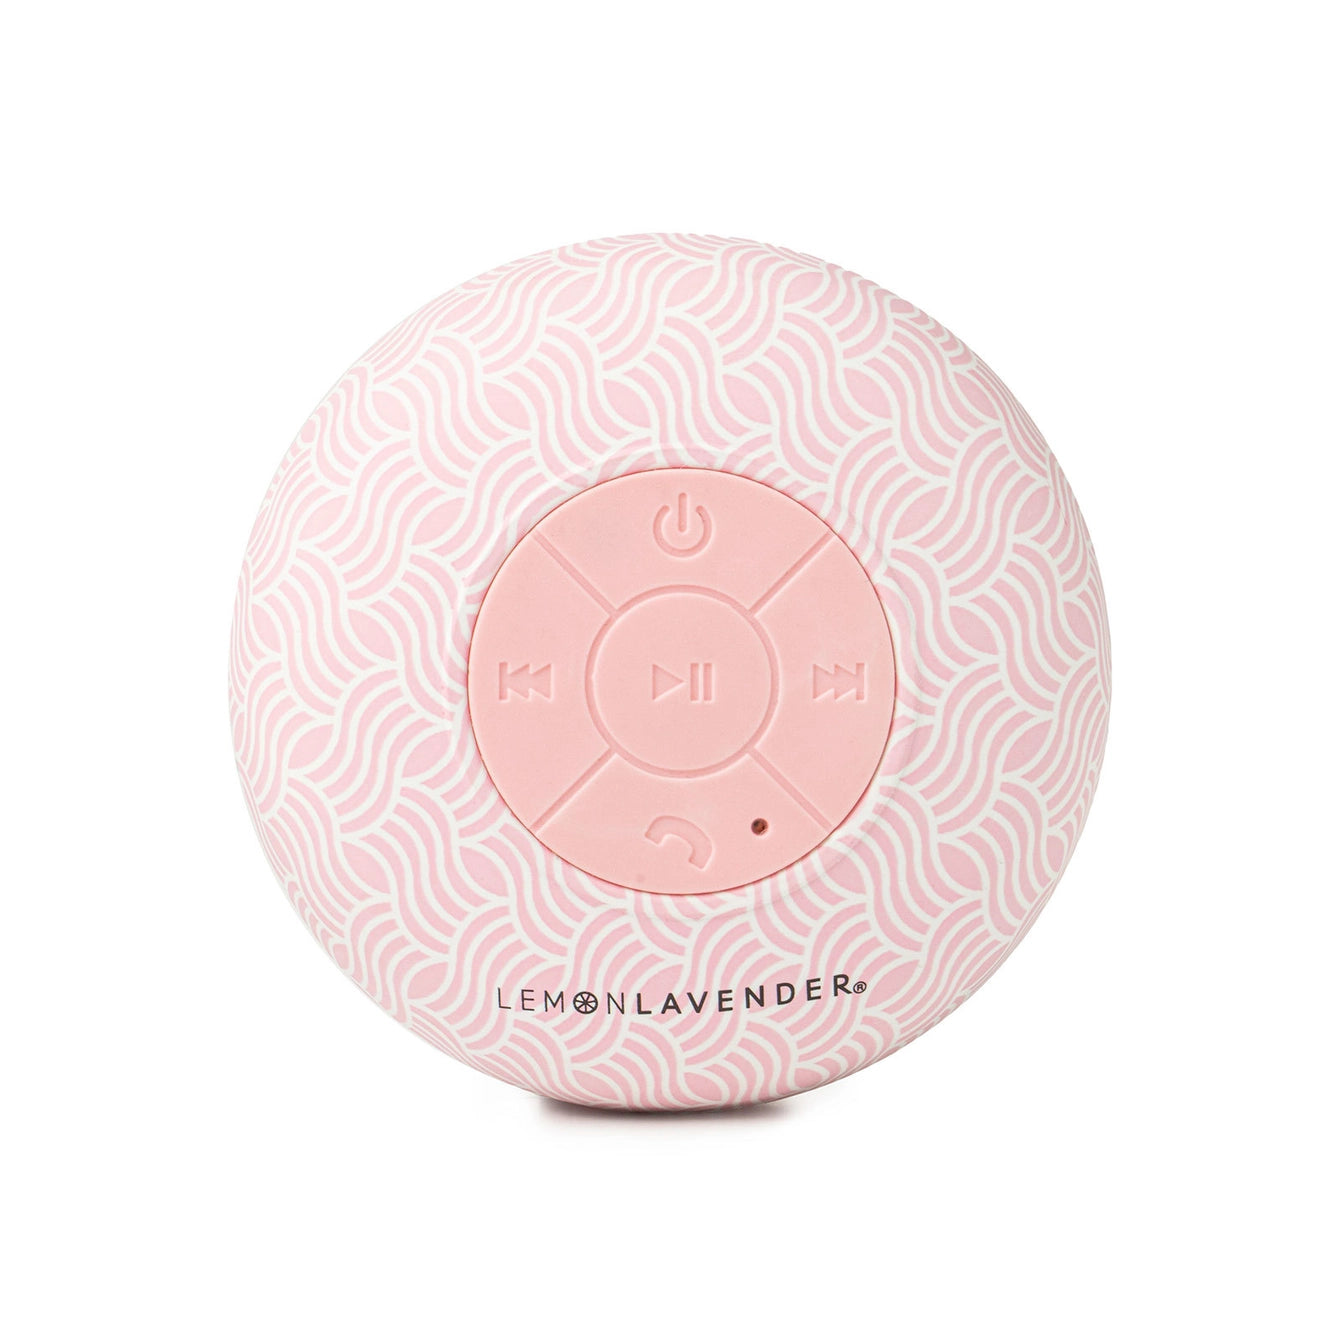 Splash-proof design with suction cup backing Pure bass sound + full call and volume control 32 feet Bluetooth-certified connection Perfect for everyday use and self-care days Charging cord included Colors:  Pink w/ White Swirls, 